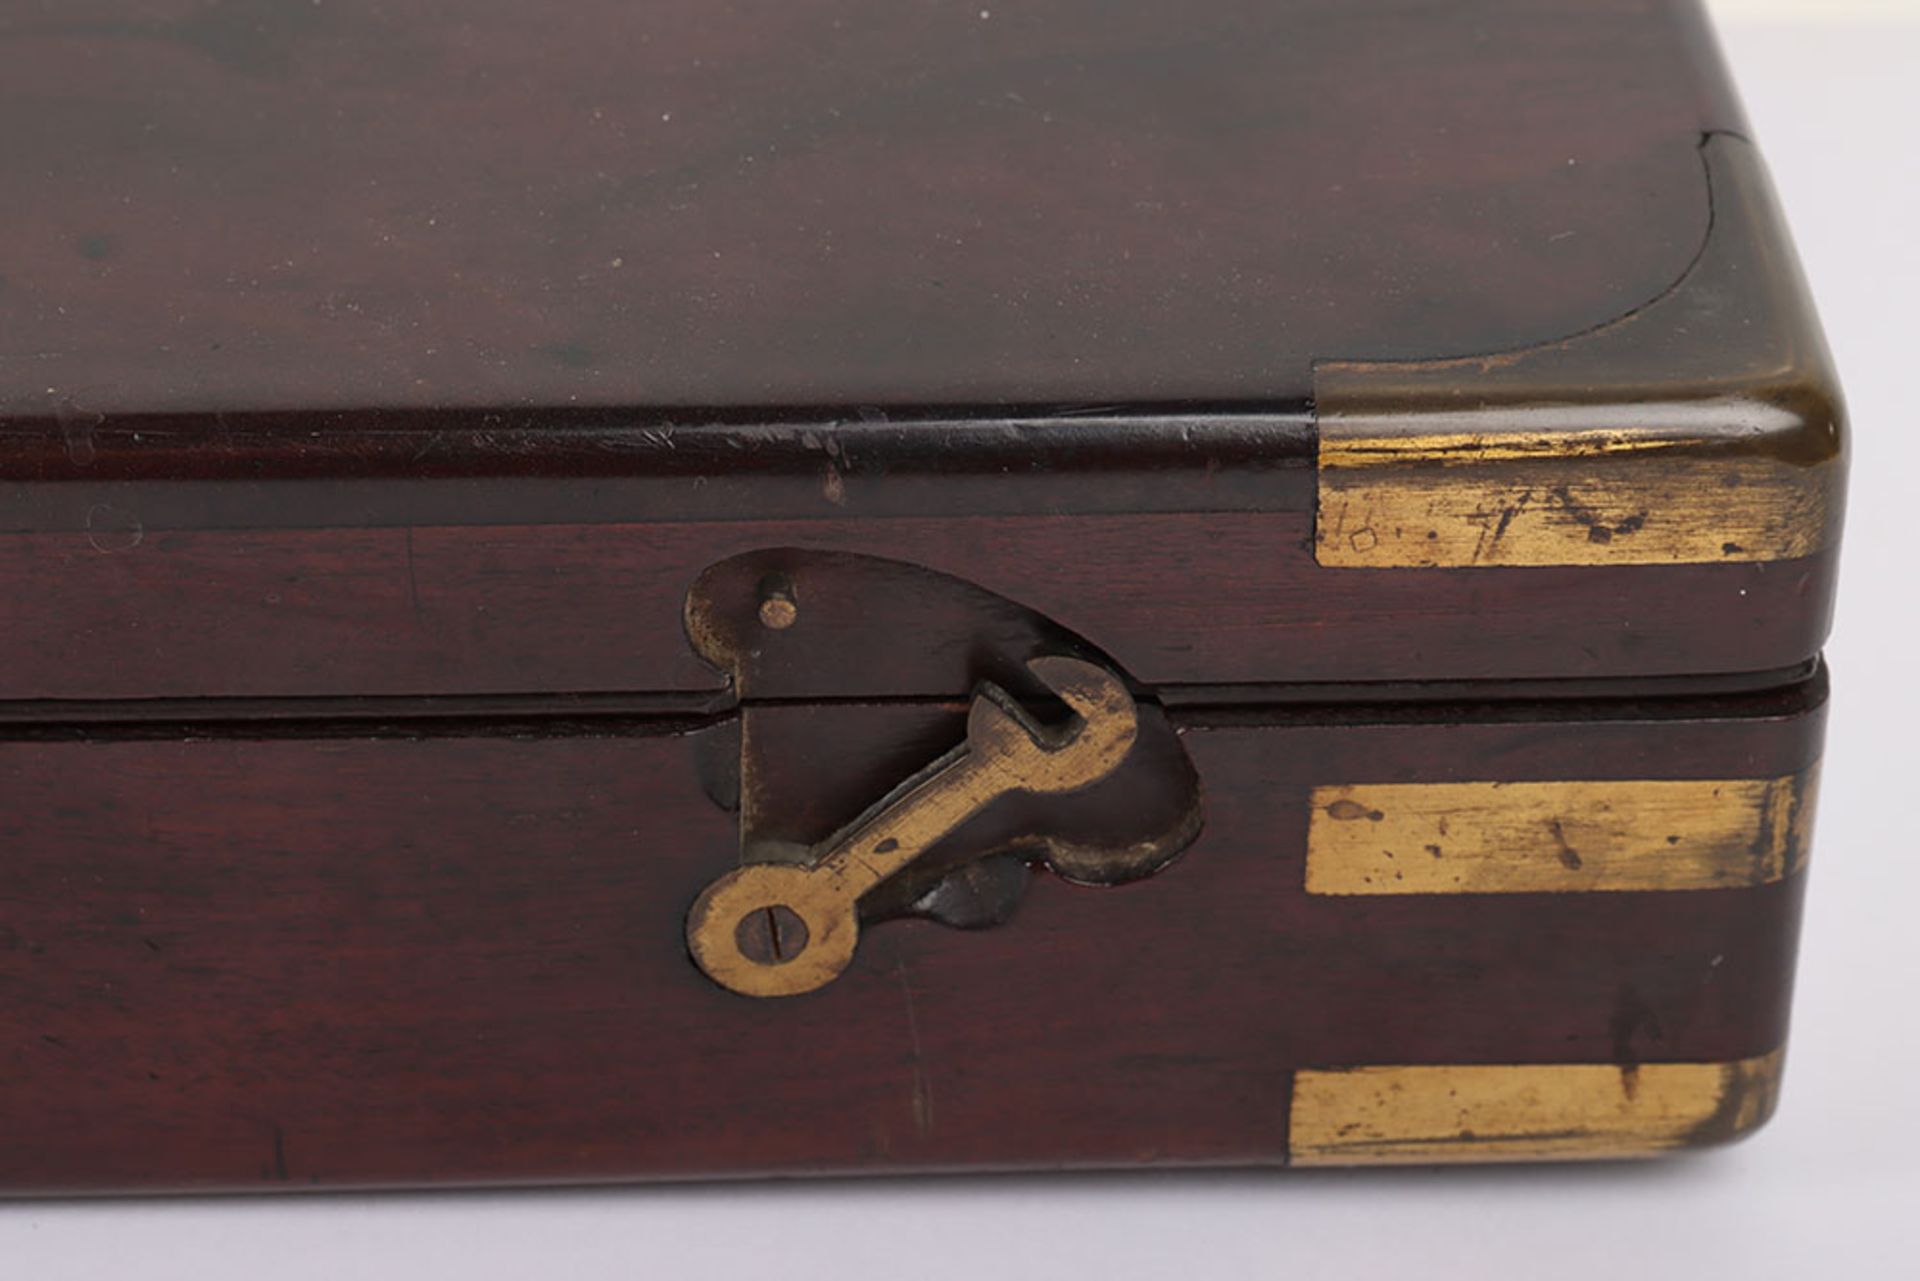 Good Brass Bound Mahogany Gun Case for a Double Barrel Percussion Gun or Rifle - Image 10 of 10